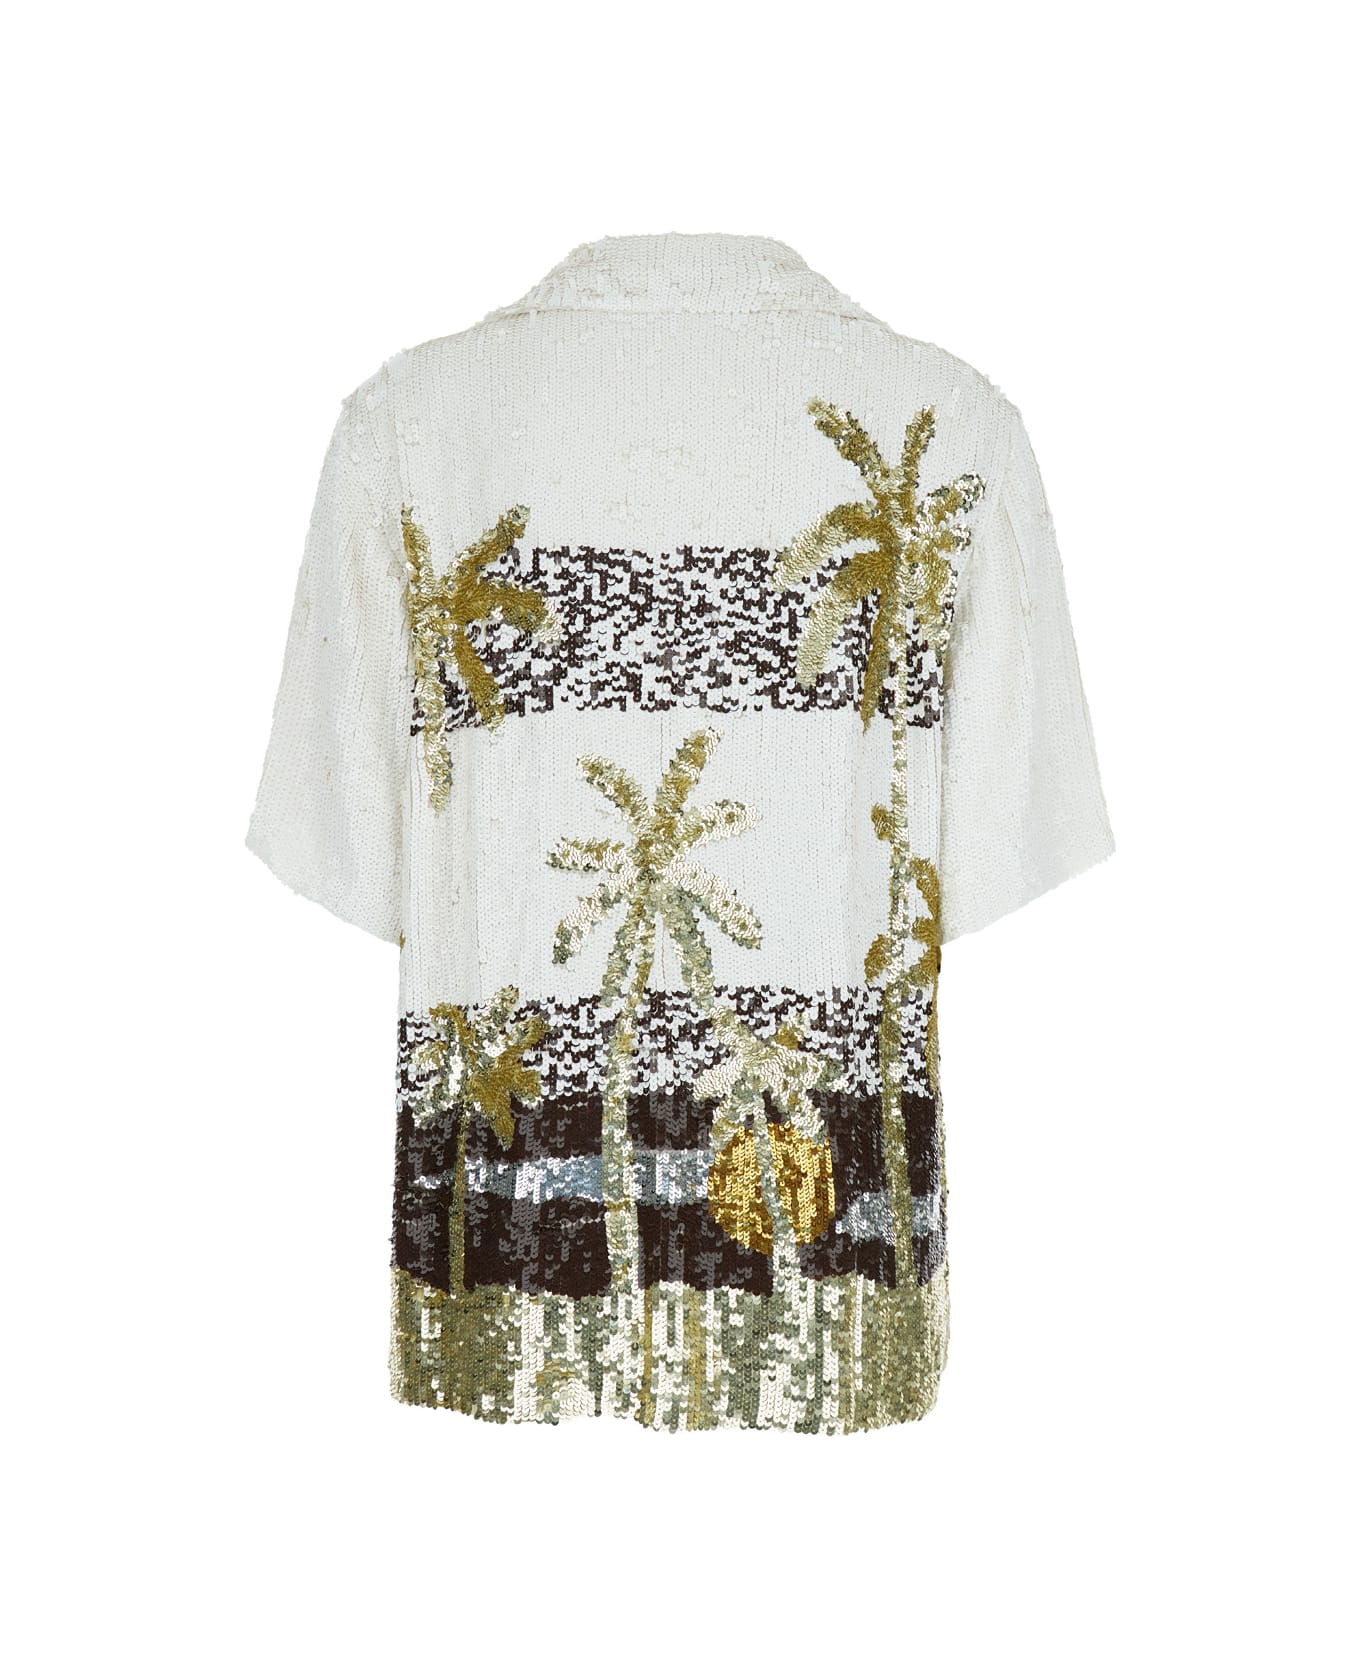 Parosh White Sequins Shirt With Palme Print In Viscose Woman - Multicolor シャツ